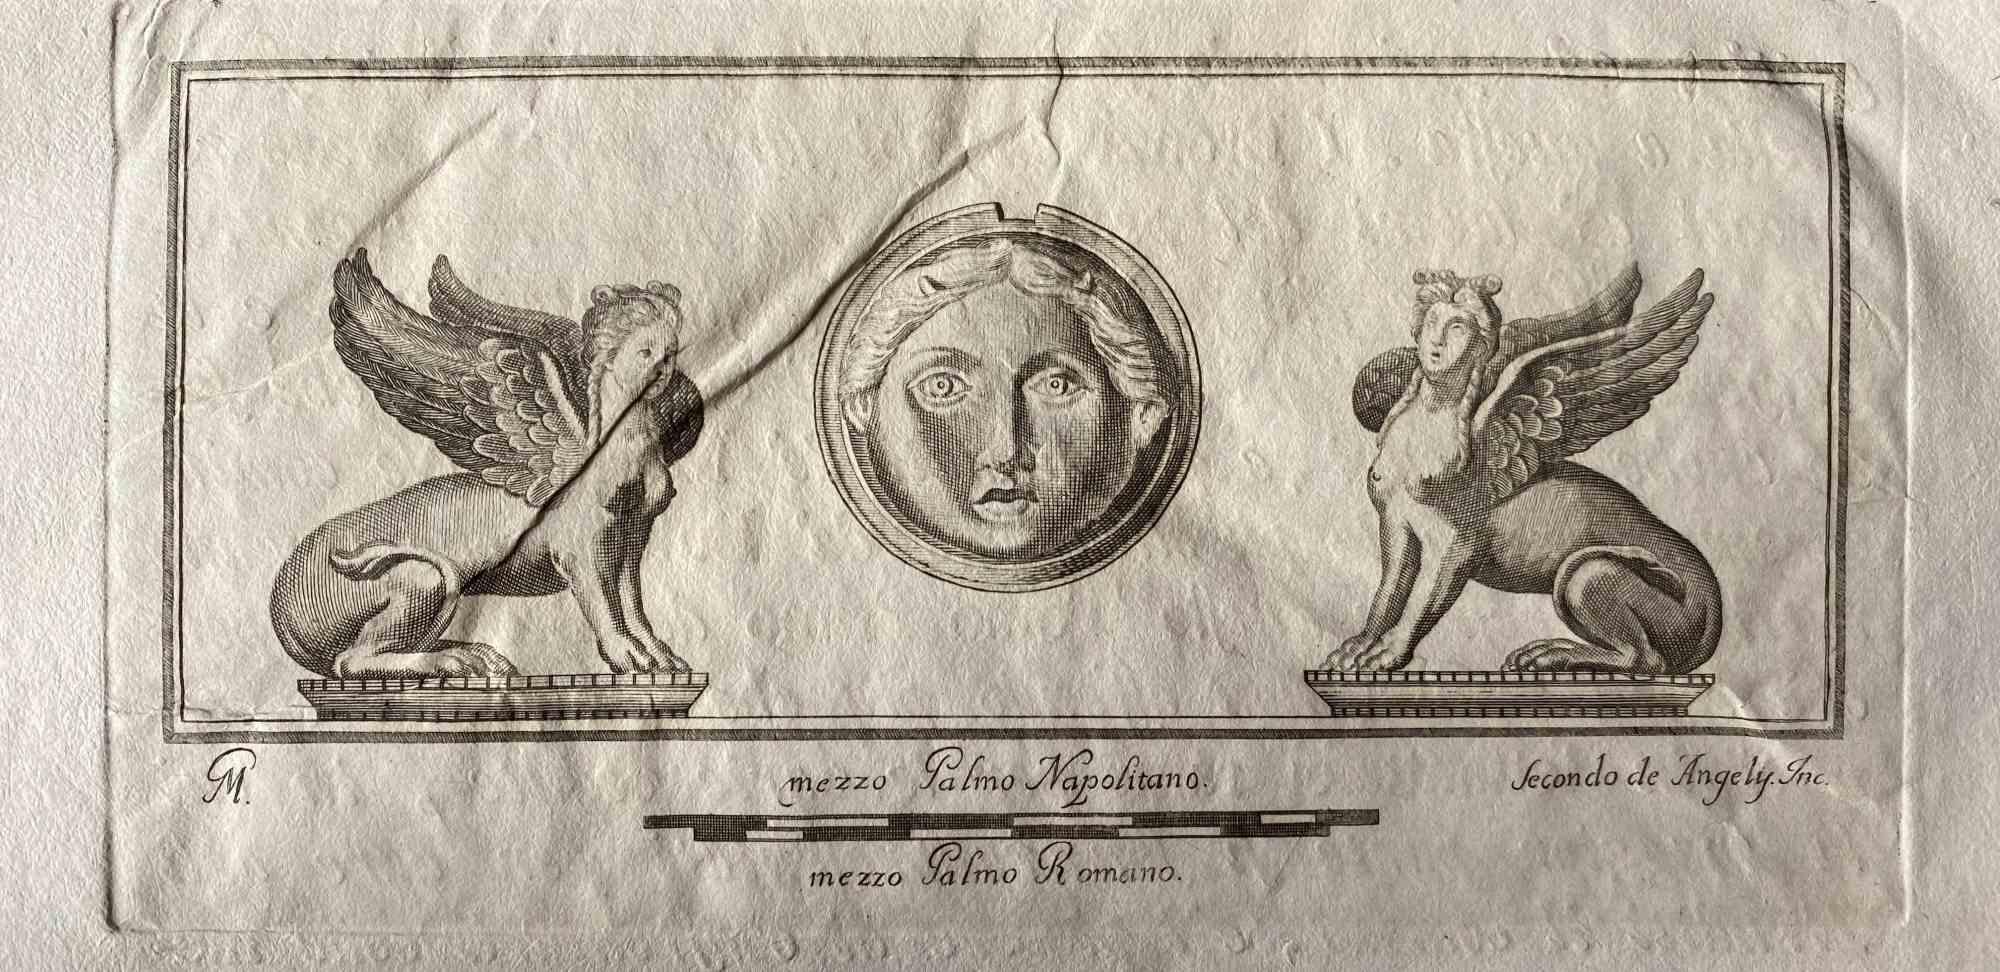 Unknown Figurative Print - Sphinxes from Ancient Rome - Original Etching by Various Masters - 1750s